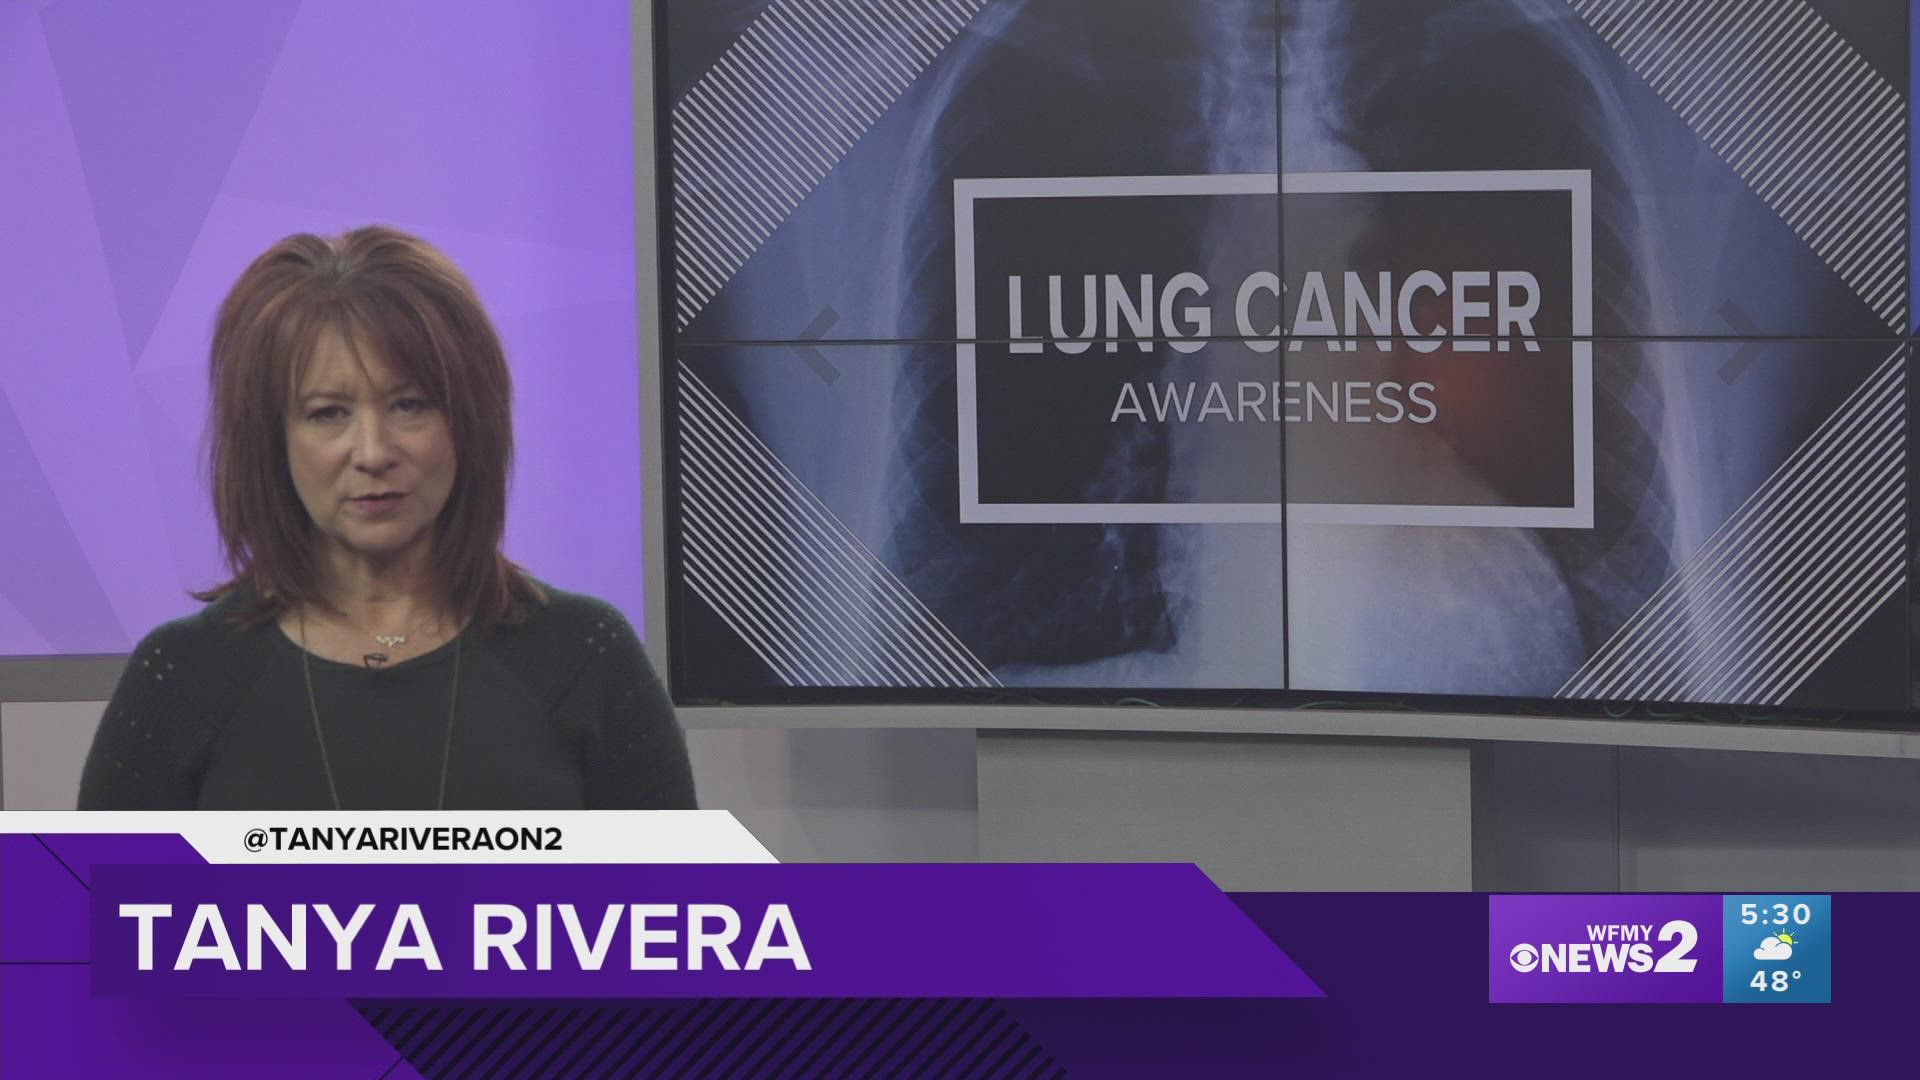 November is lung cancer awareness month, and experts want people to know the warning signs so it can be detected early.